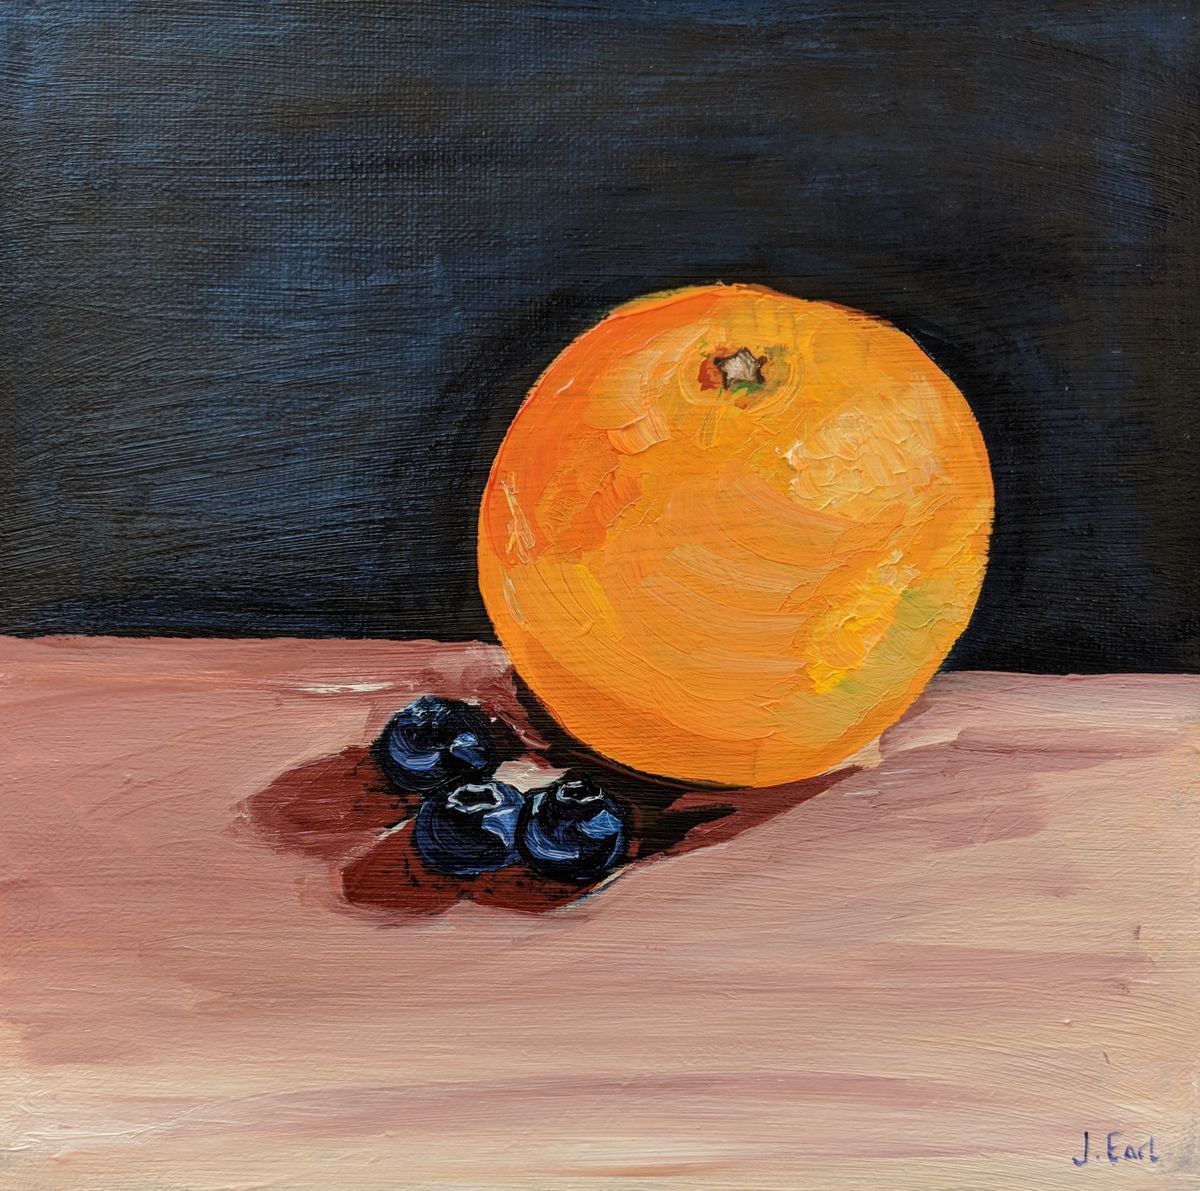 Satsuma and blueberries by Jo Earl